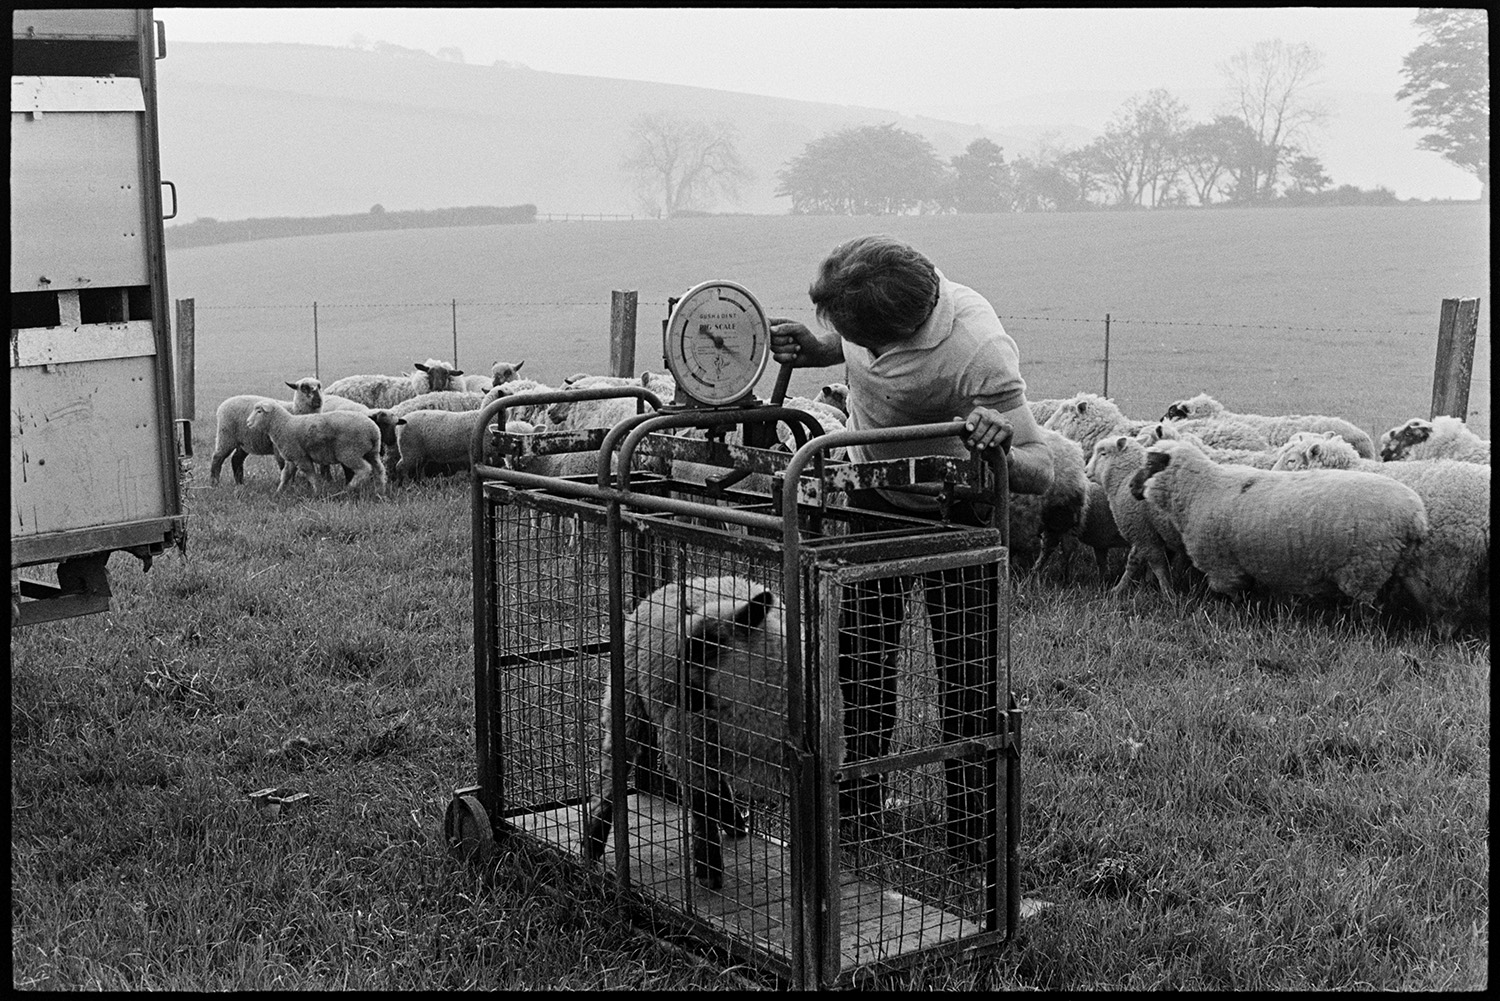 Farmers taking flock of sheep through village to be weighed and sorted. 
[Mr Cole weighing a sheep using a weighing machine in a field at Densham, Ashreigney. Other sheep are in the background by a wire fence.]